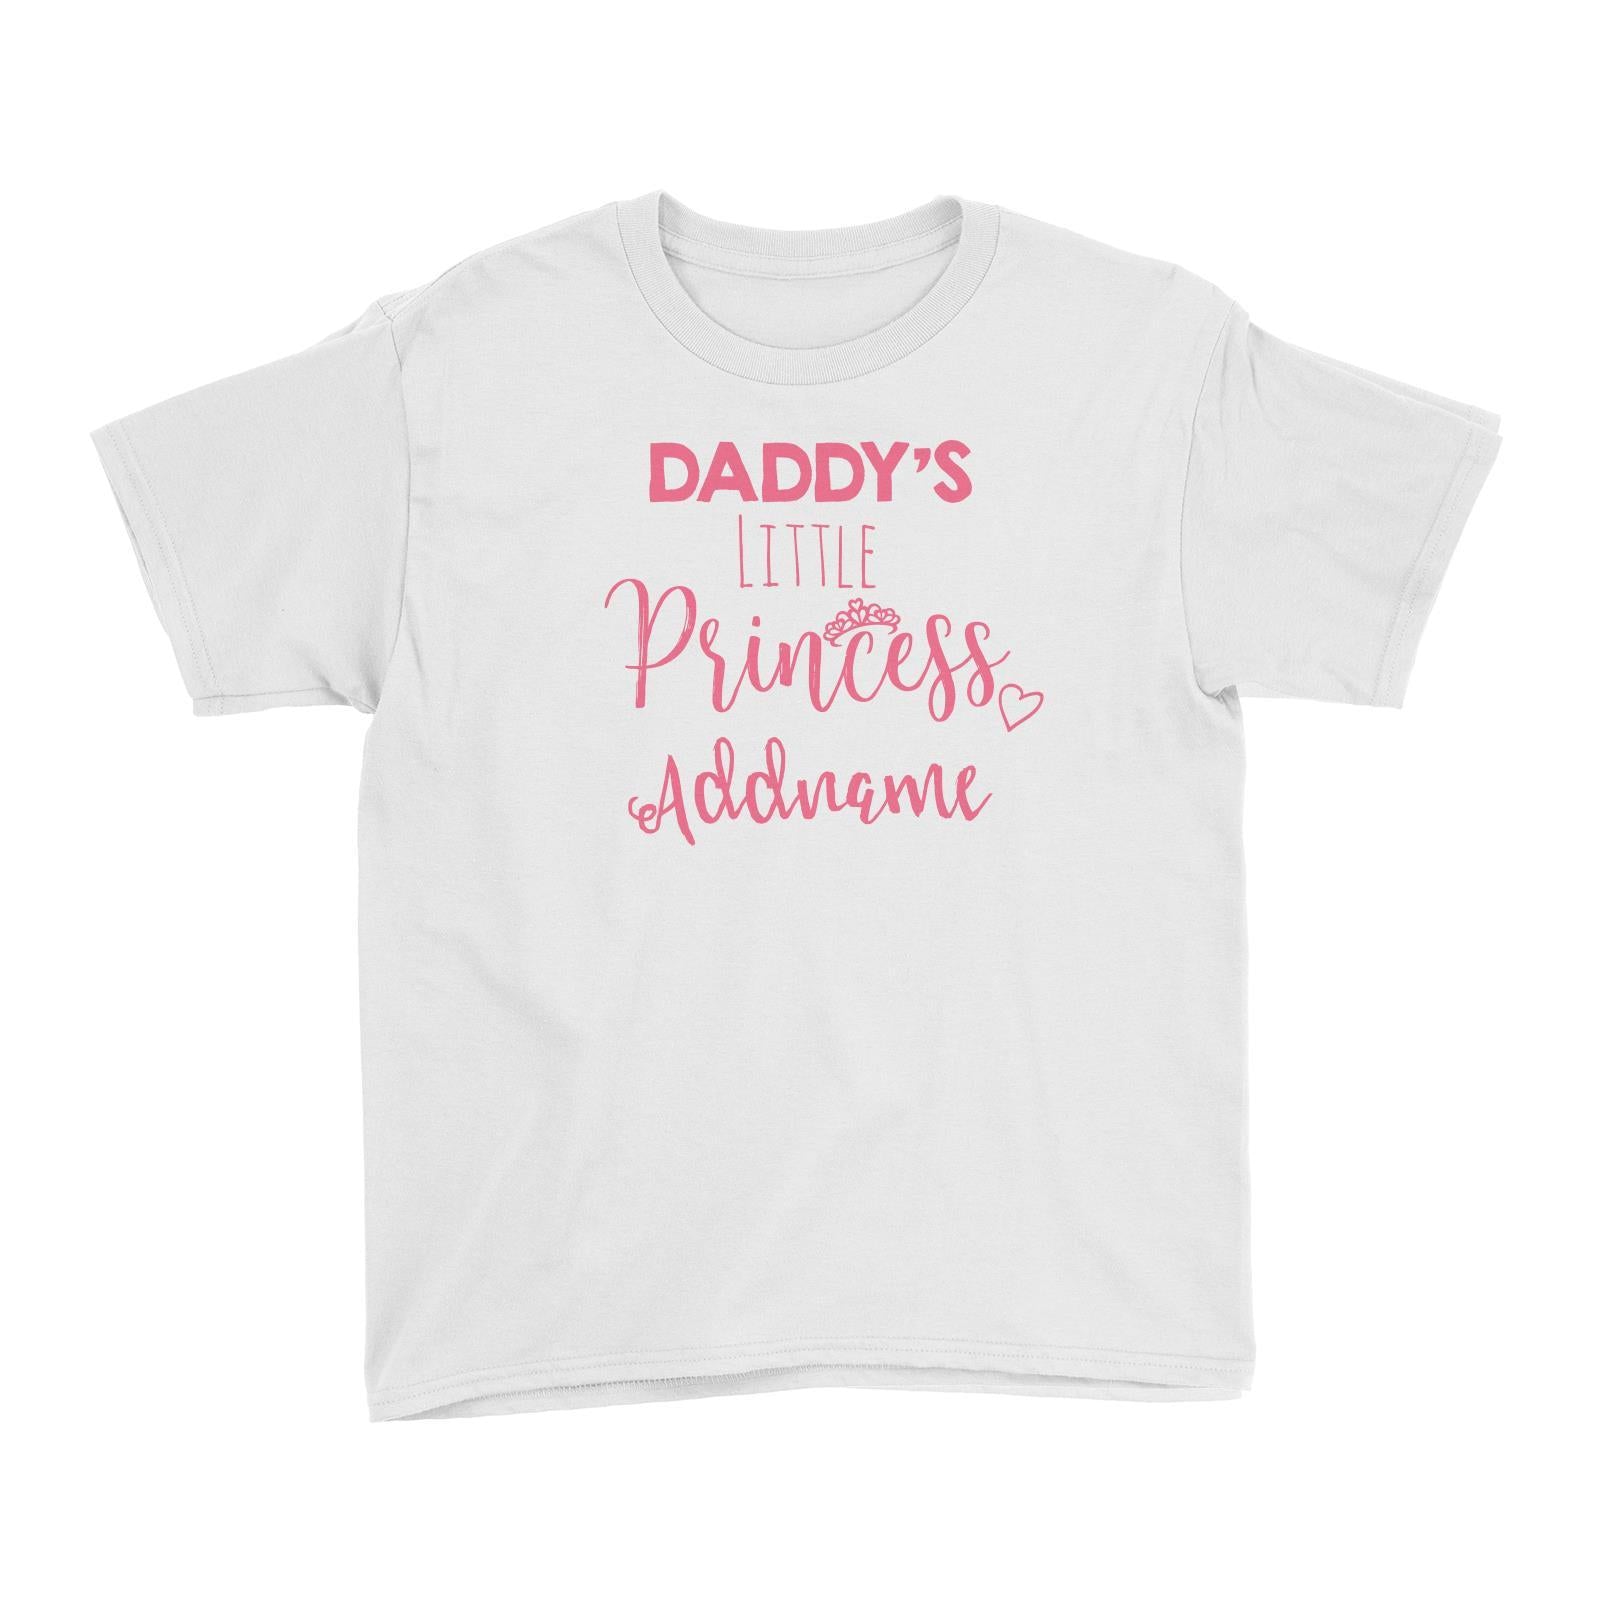 Daddy's Little Princess Addname Kid's T-Shirt